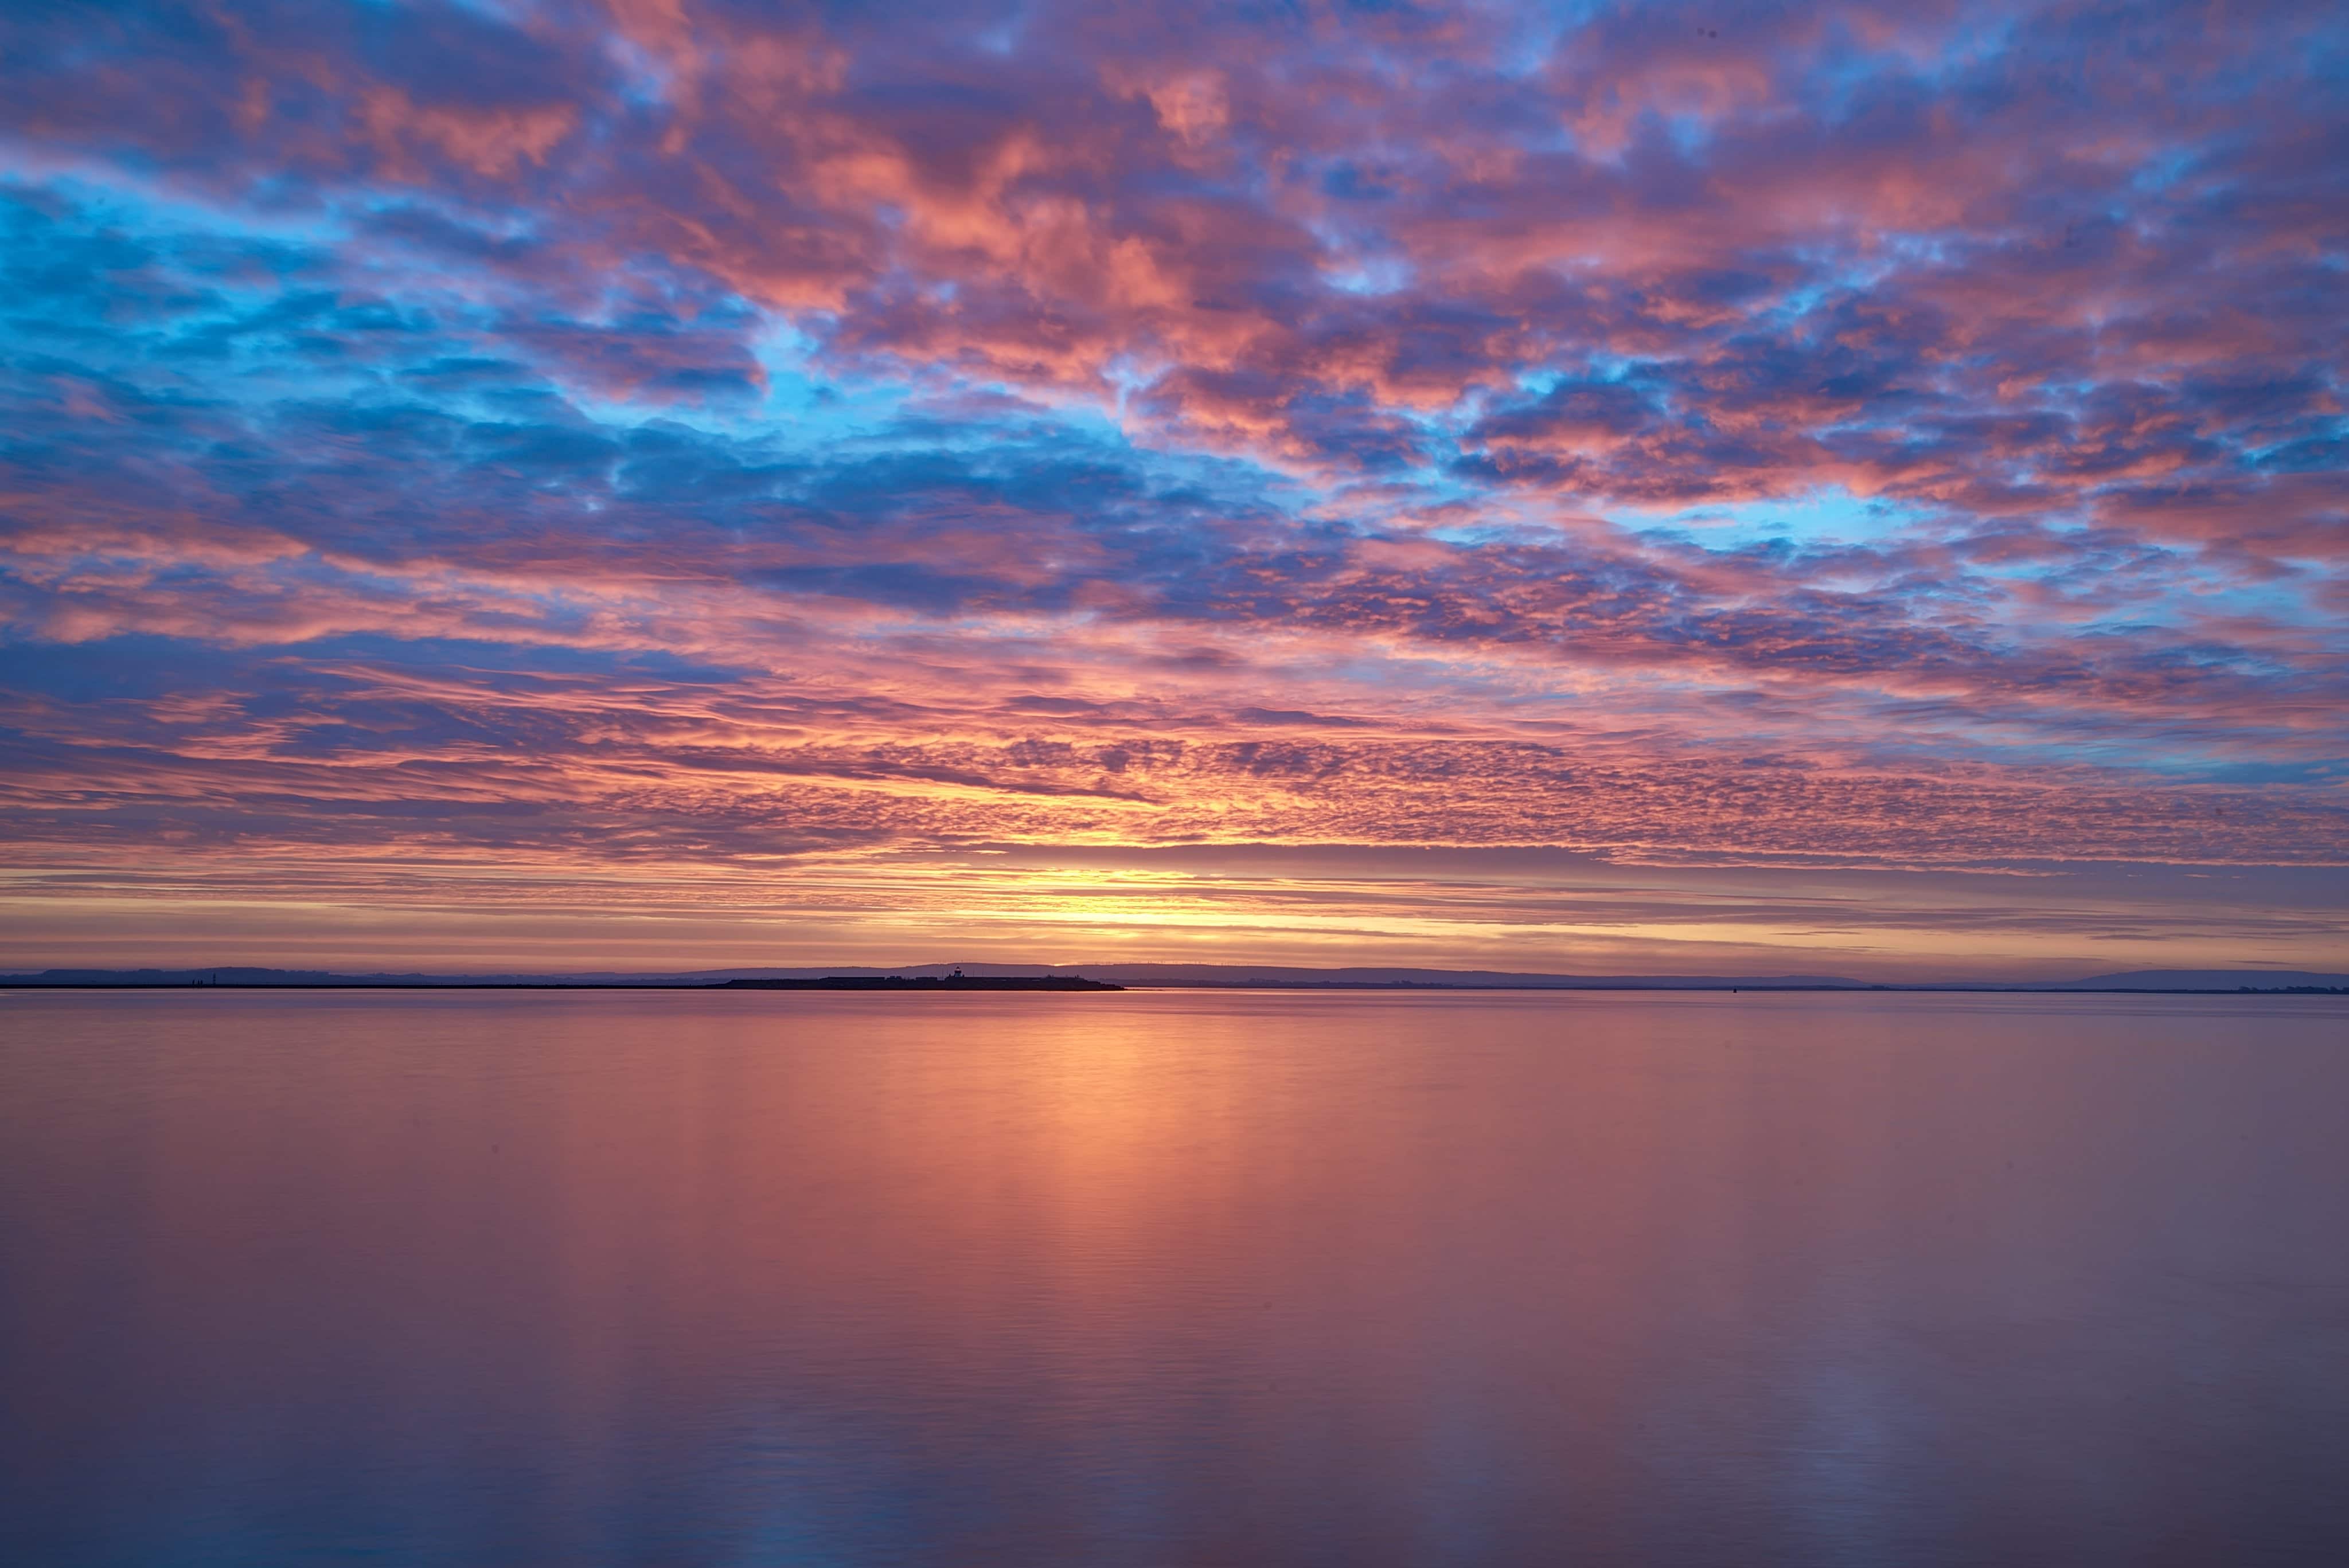 Colorful sunrise on Galway bay by WoodRoad Photography @woodroadphotos